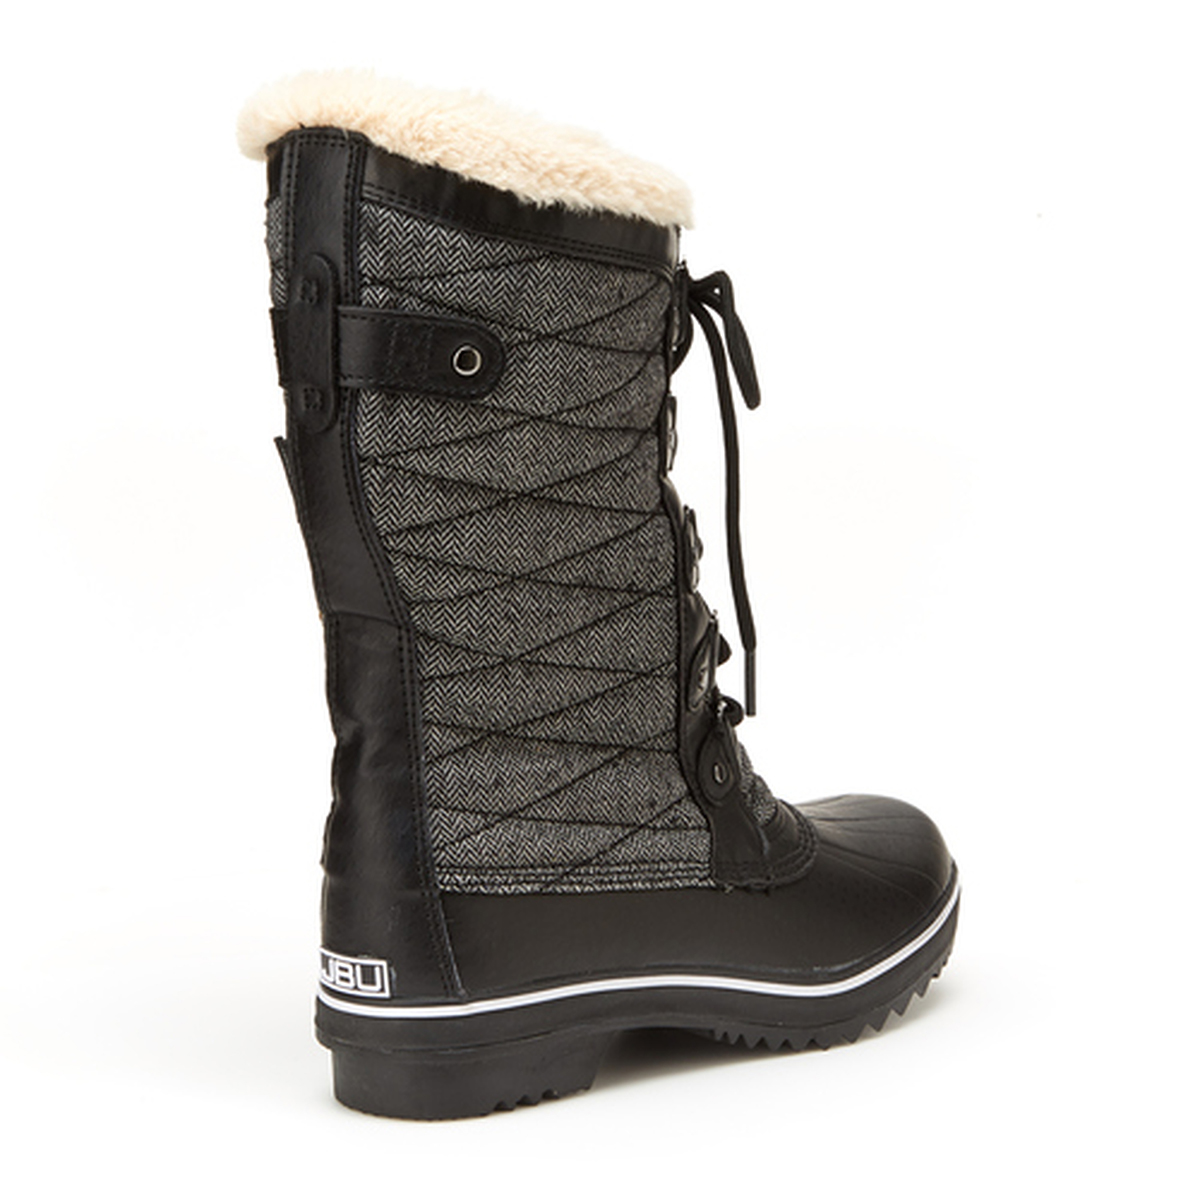 Womens JBU Chilly Weather-Ready Duck Boots